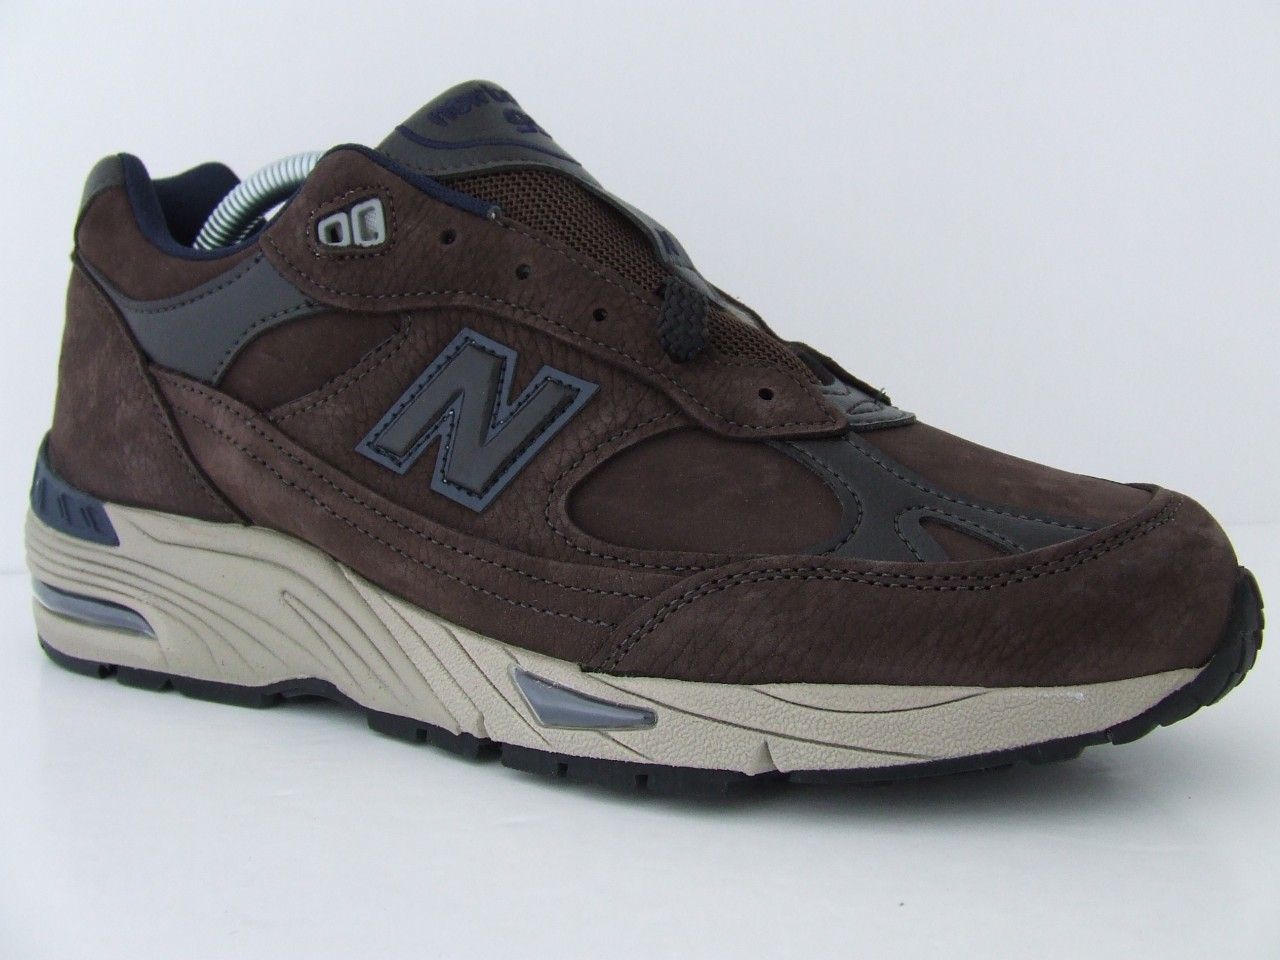 Mens New Balance Trainers 991 NBB Brown Navy Blue Retro Sneakers Made